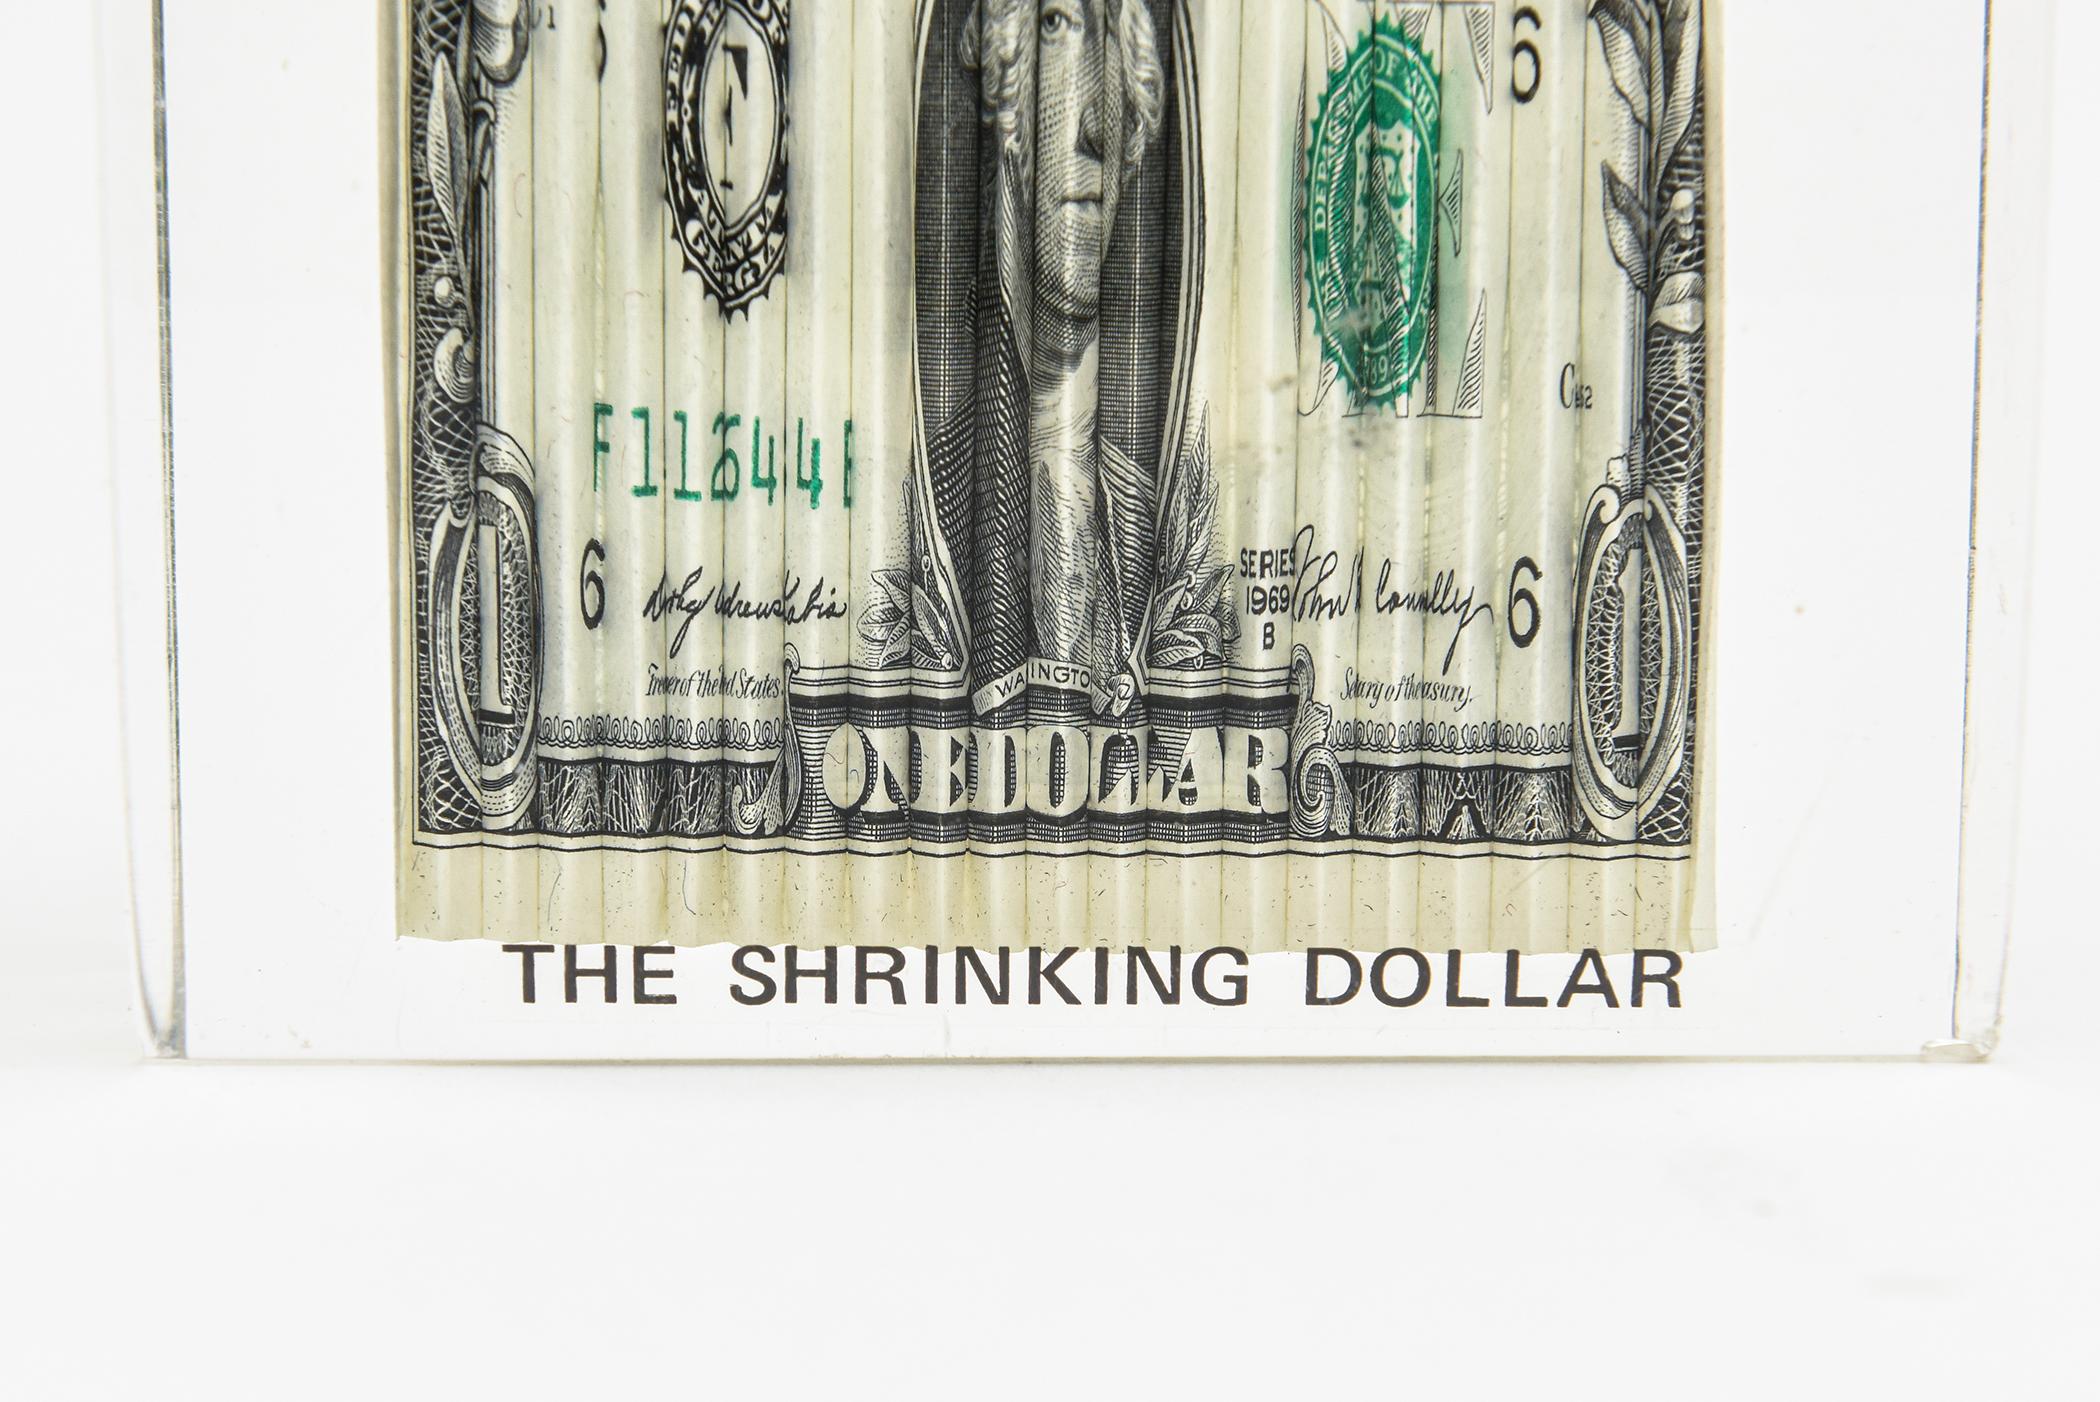 This iconic small vintage 1970s pop art lucite sculpture is called THE SHRINKING DOLLAR